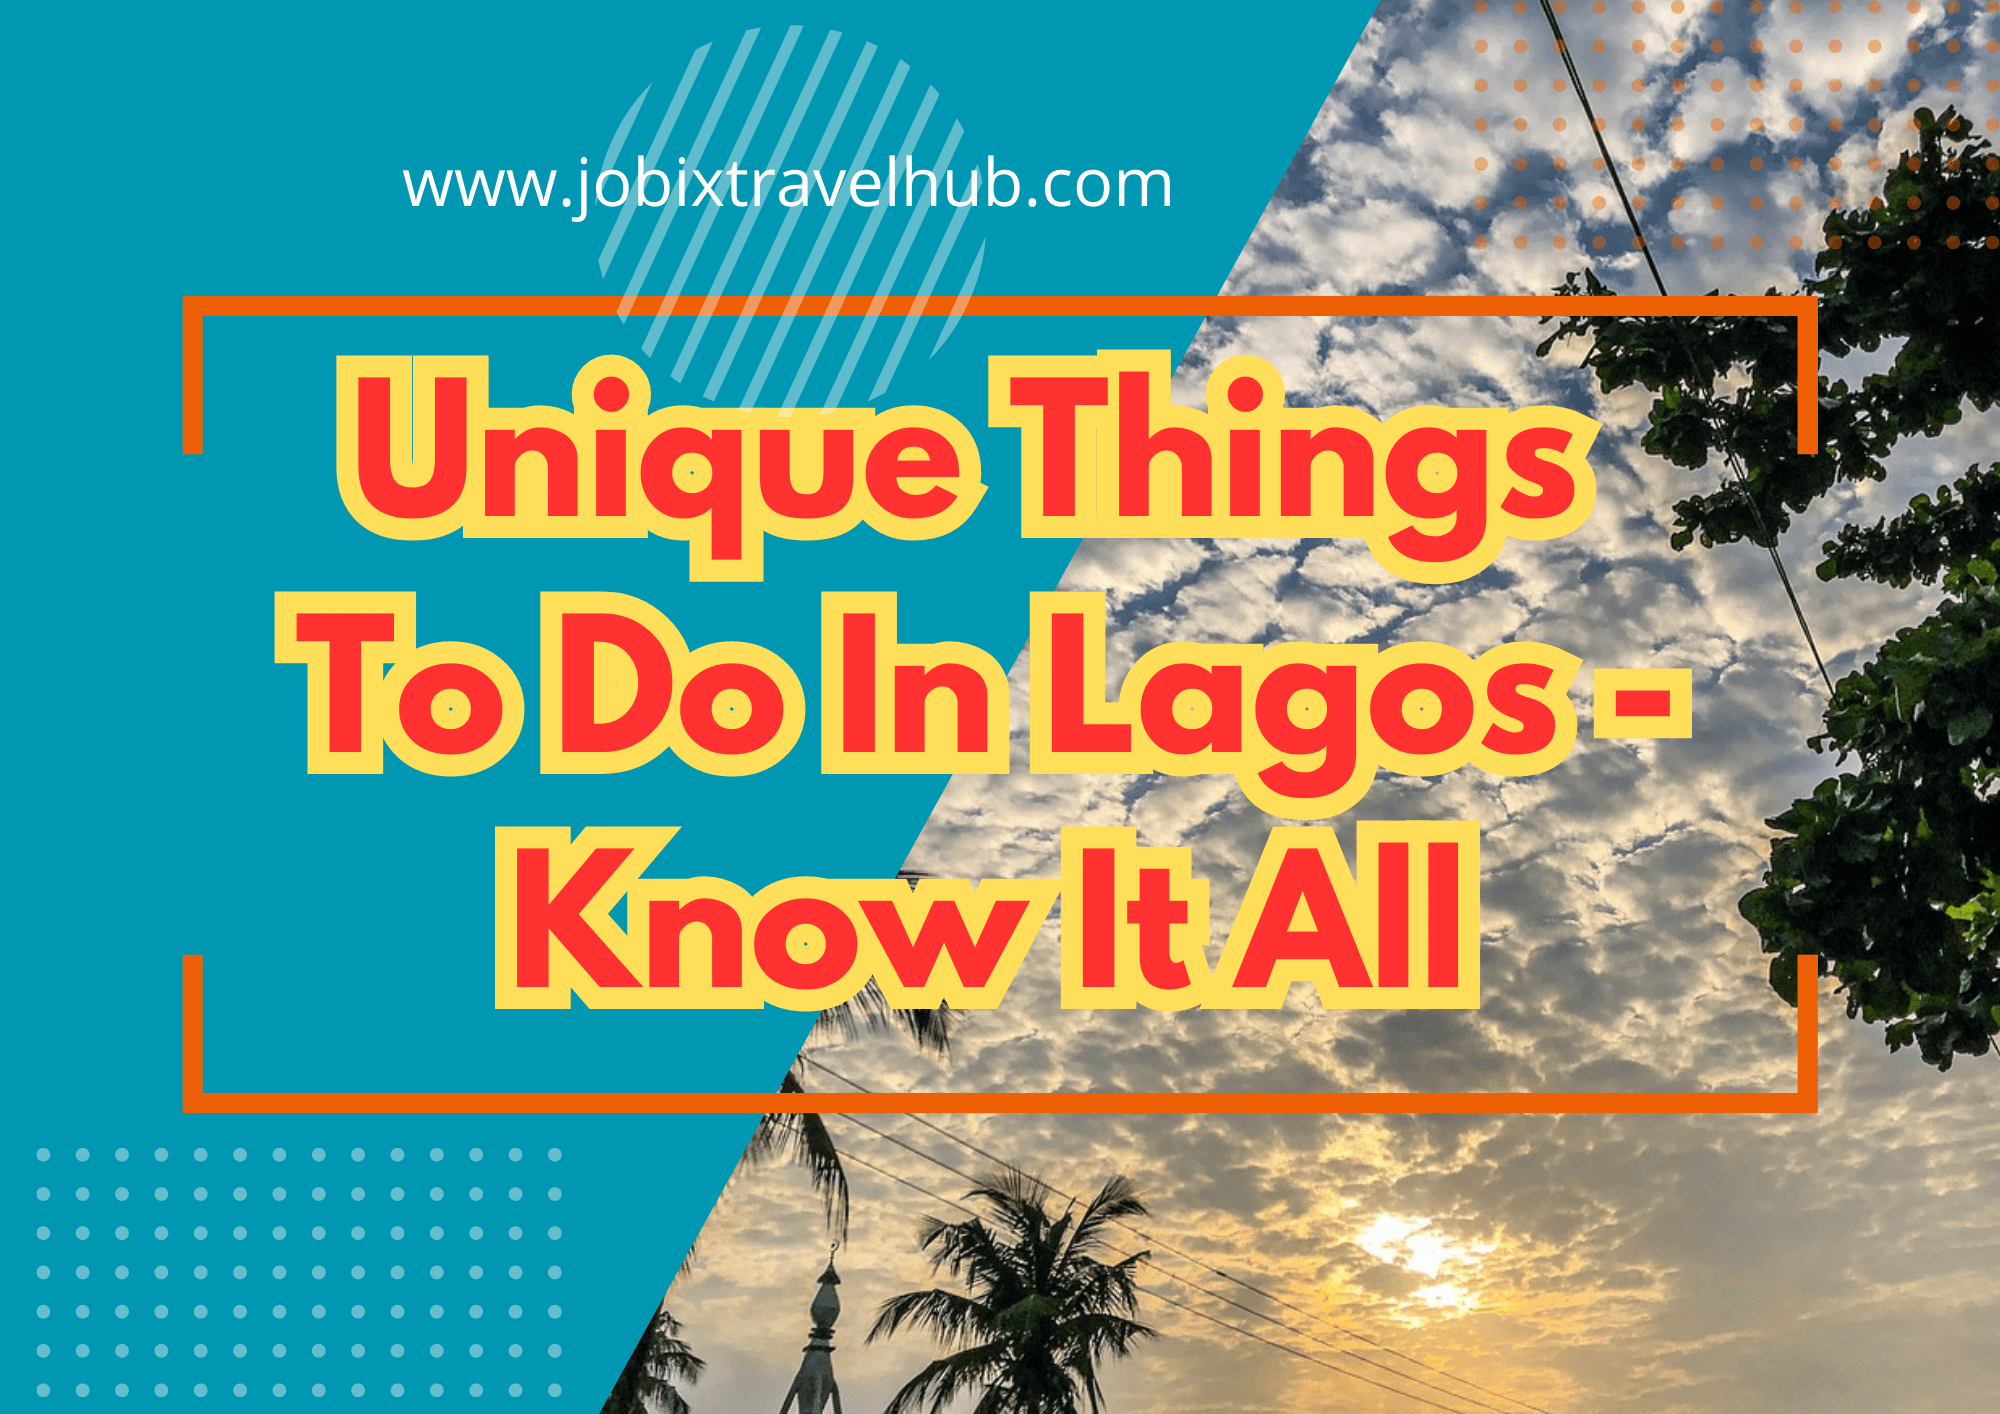 Unique Things To Do In Lagos - Know It All